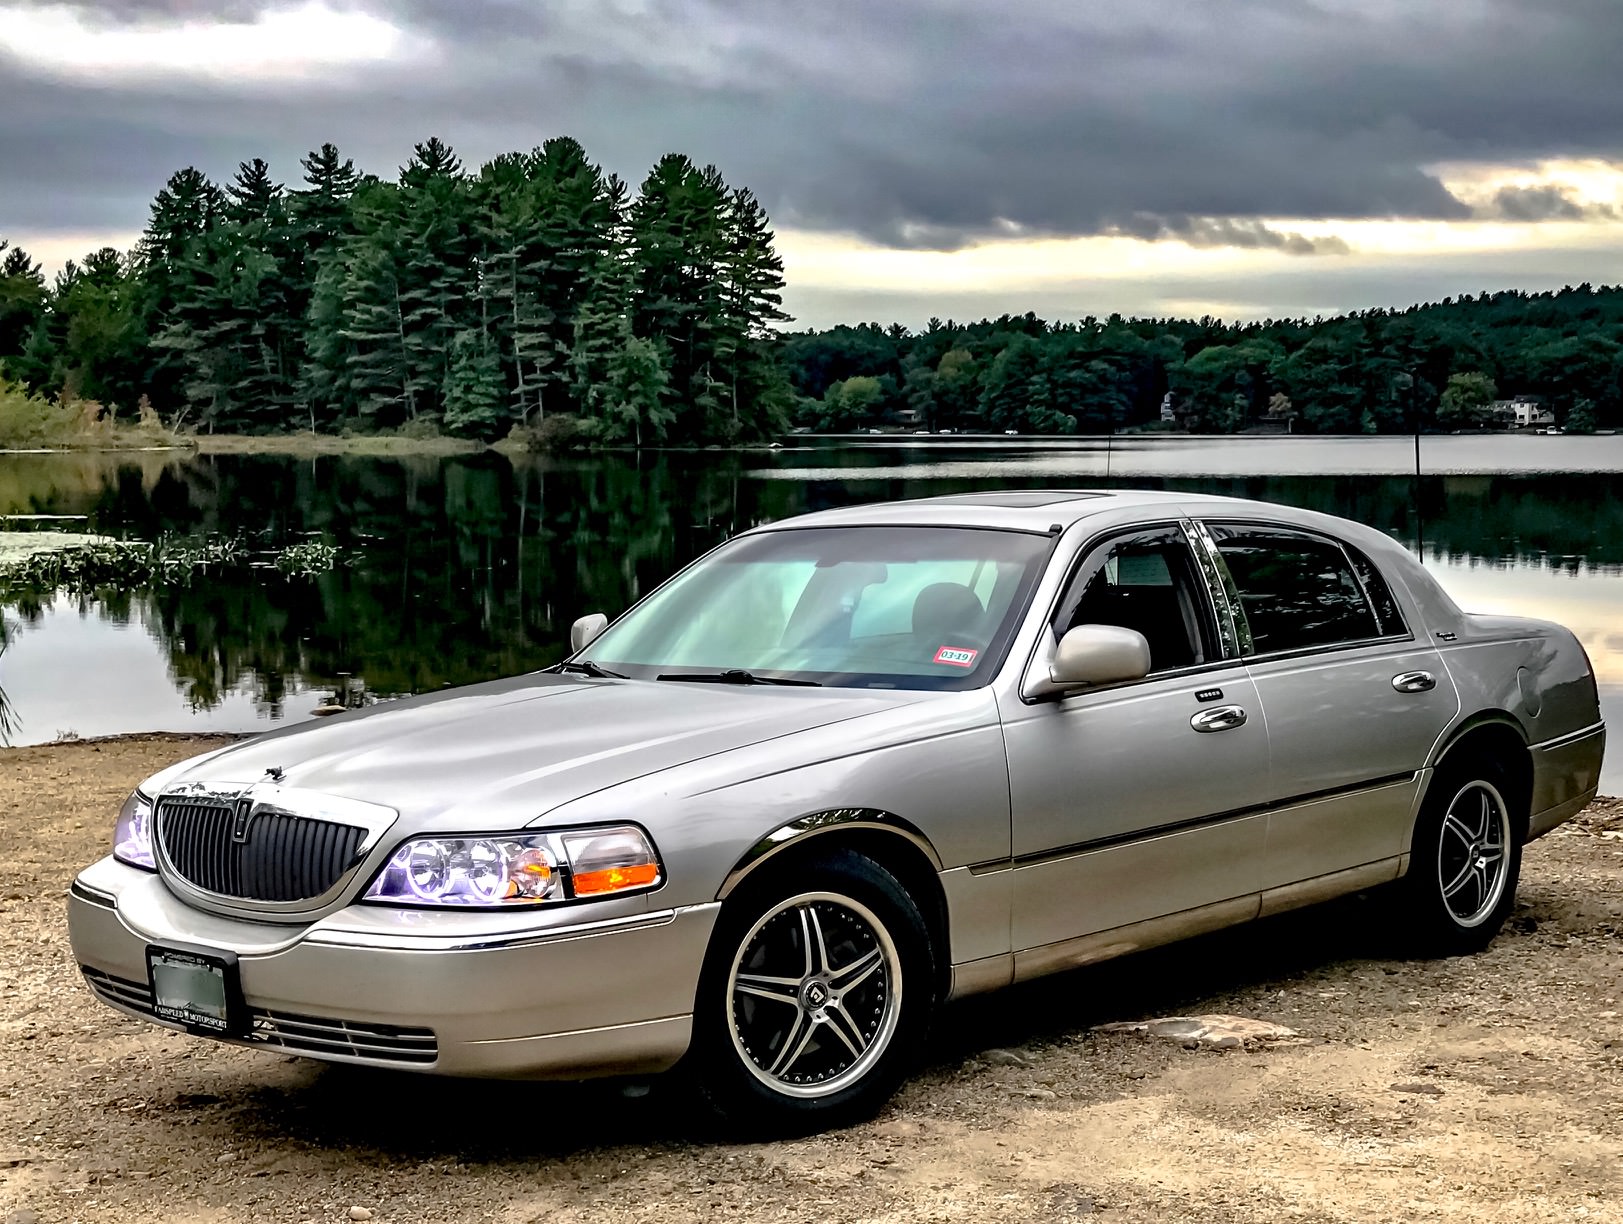 2005 Lincoln Town Car Signature Limited "Roadwolf" | Members' Cars |  Crownvic.net